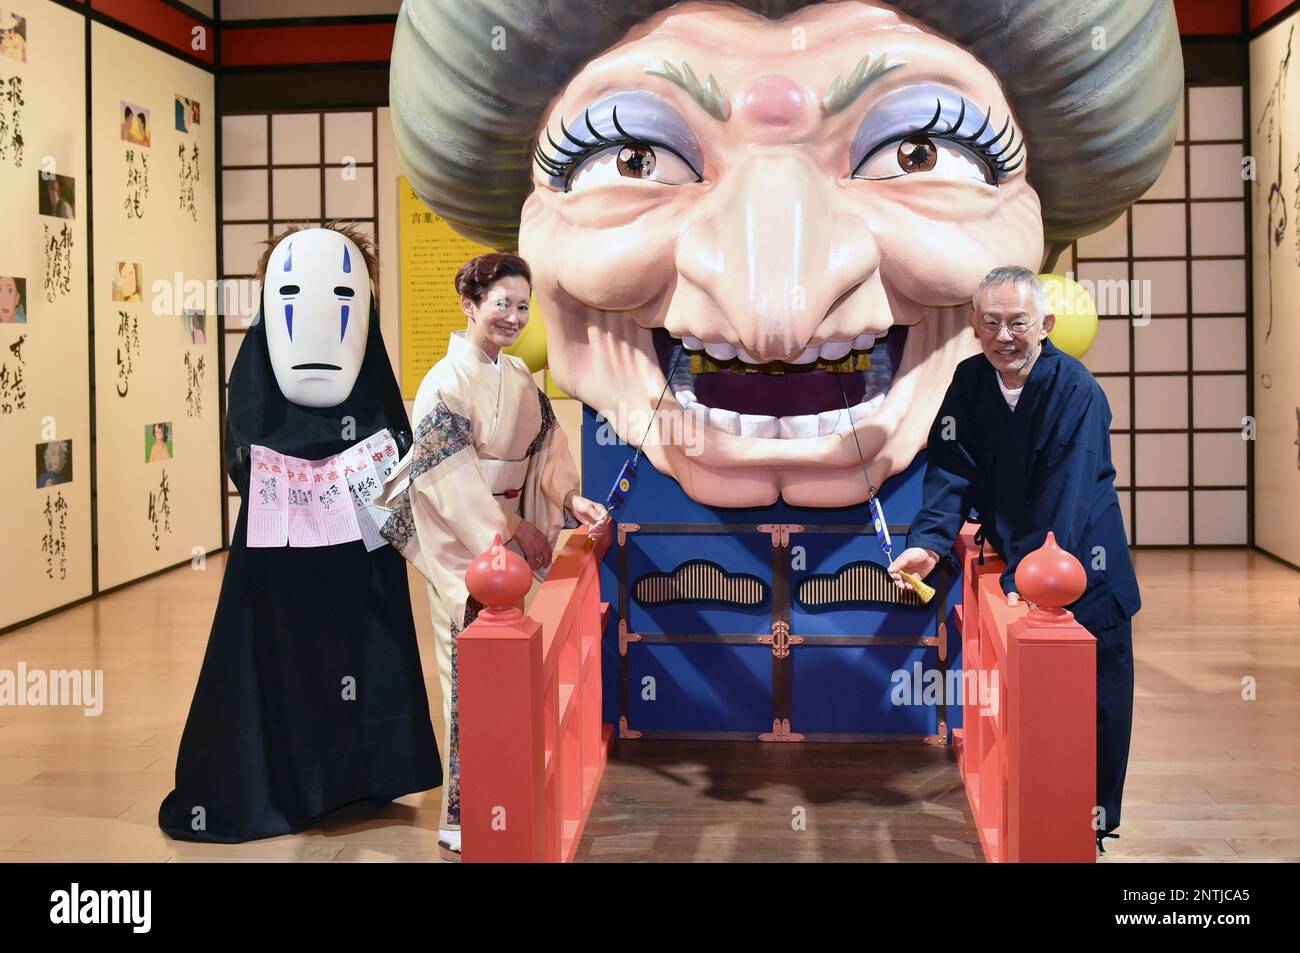 What No-Face Represents In Spirited Away